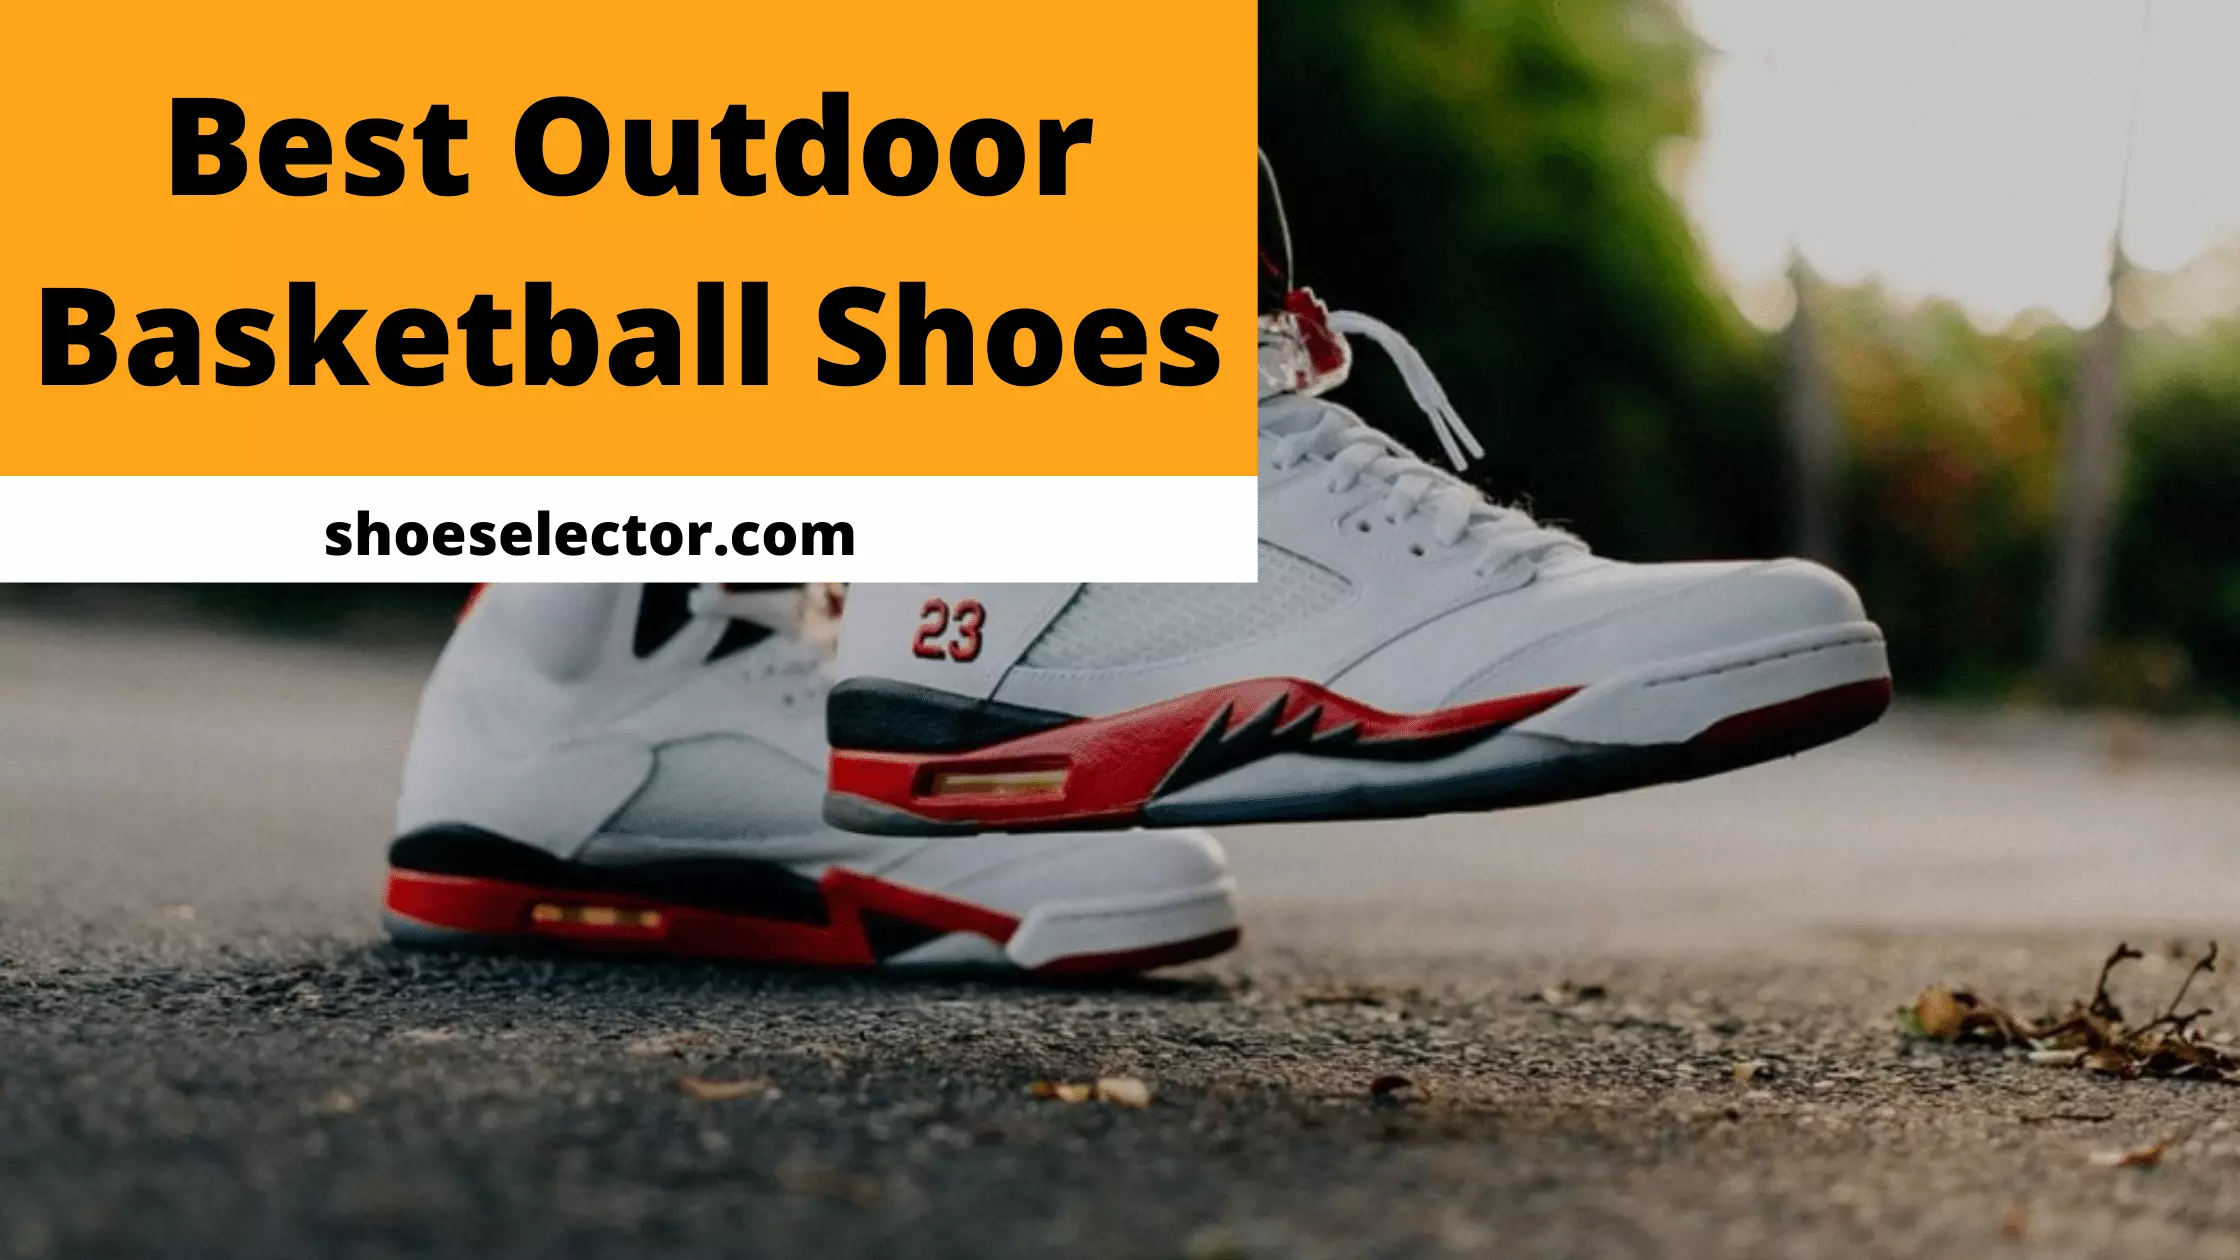 Best Outdoor Basketball Shoes - Durability And Performance